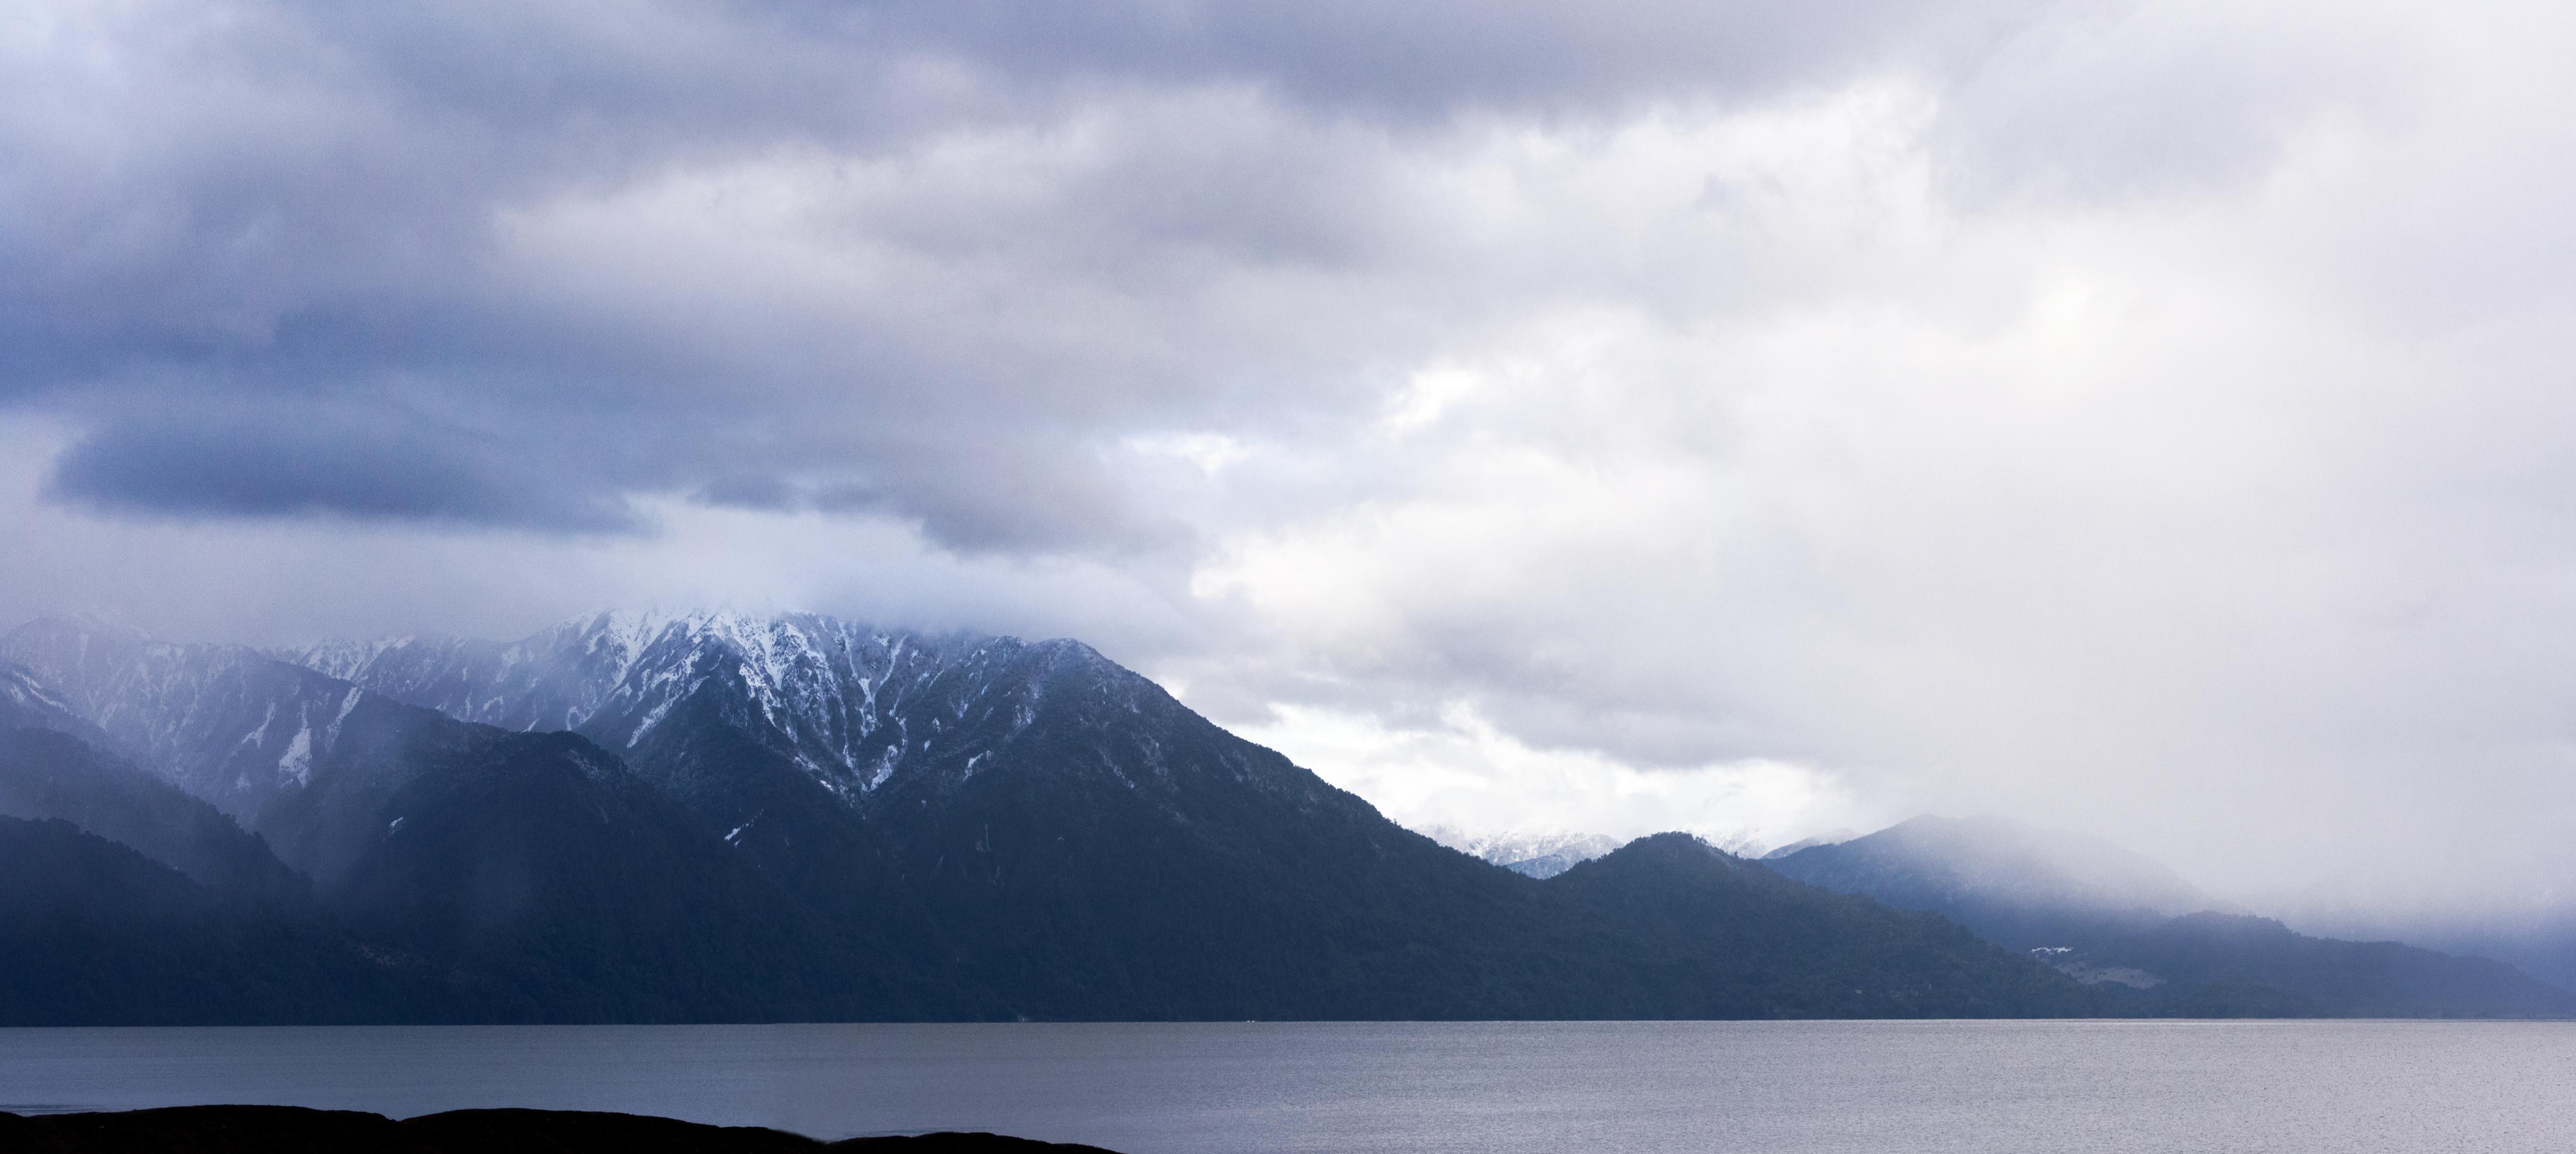 Clouds Lake Chile South America Nature Landscape Mountains Snow 5058x2265